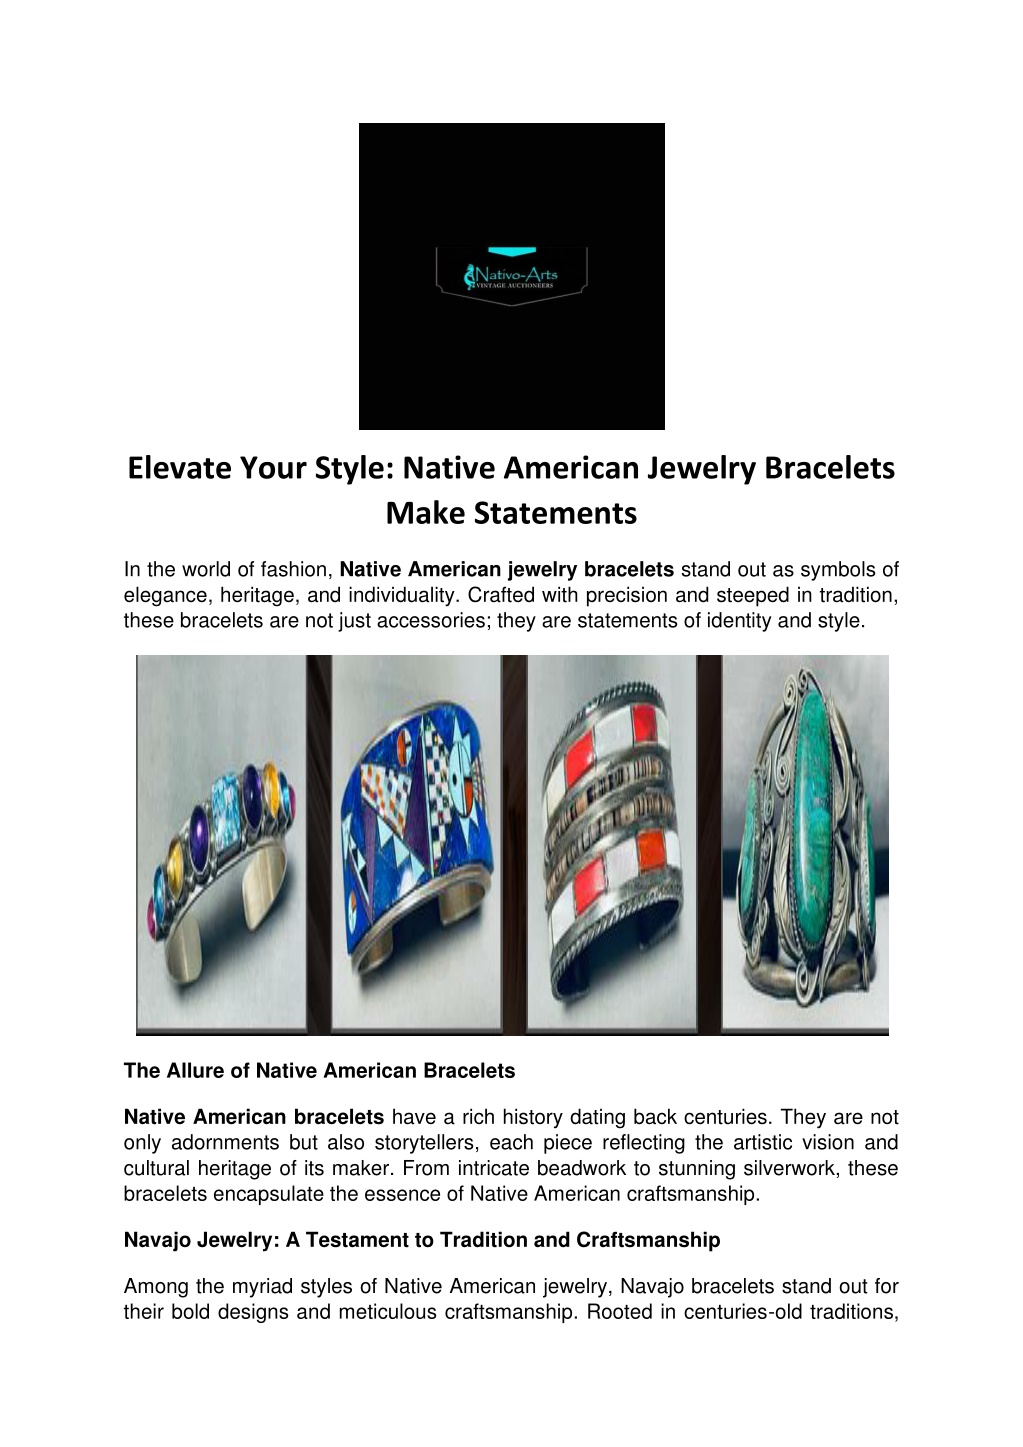 PPT - Elevate Your Style- Native American Jewelry Bracelets Make ...